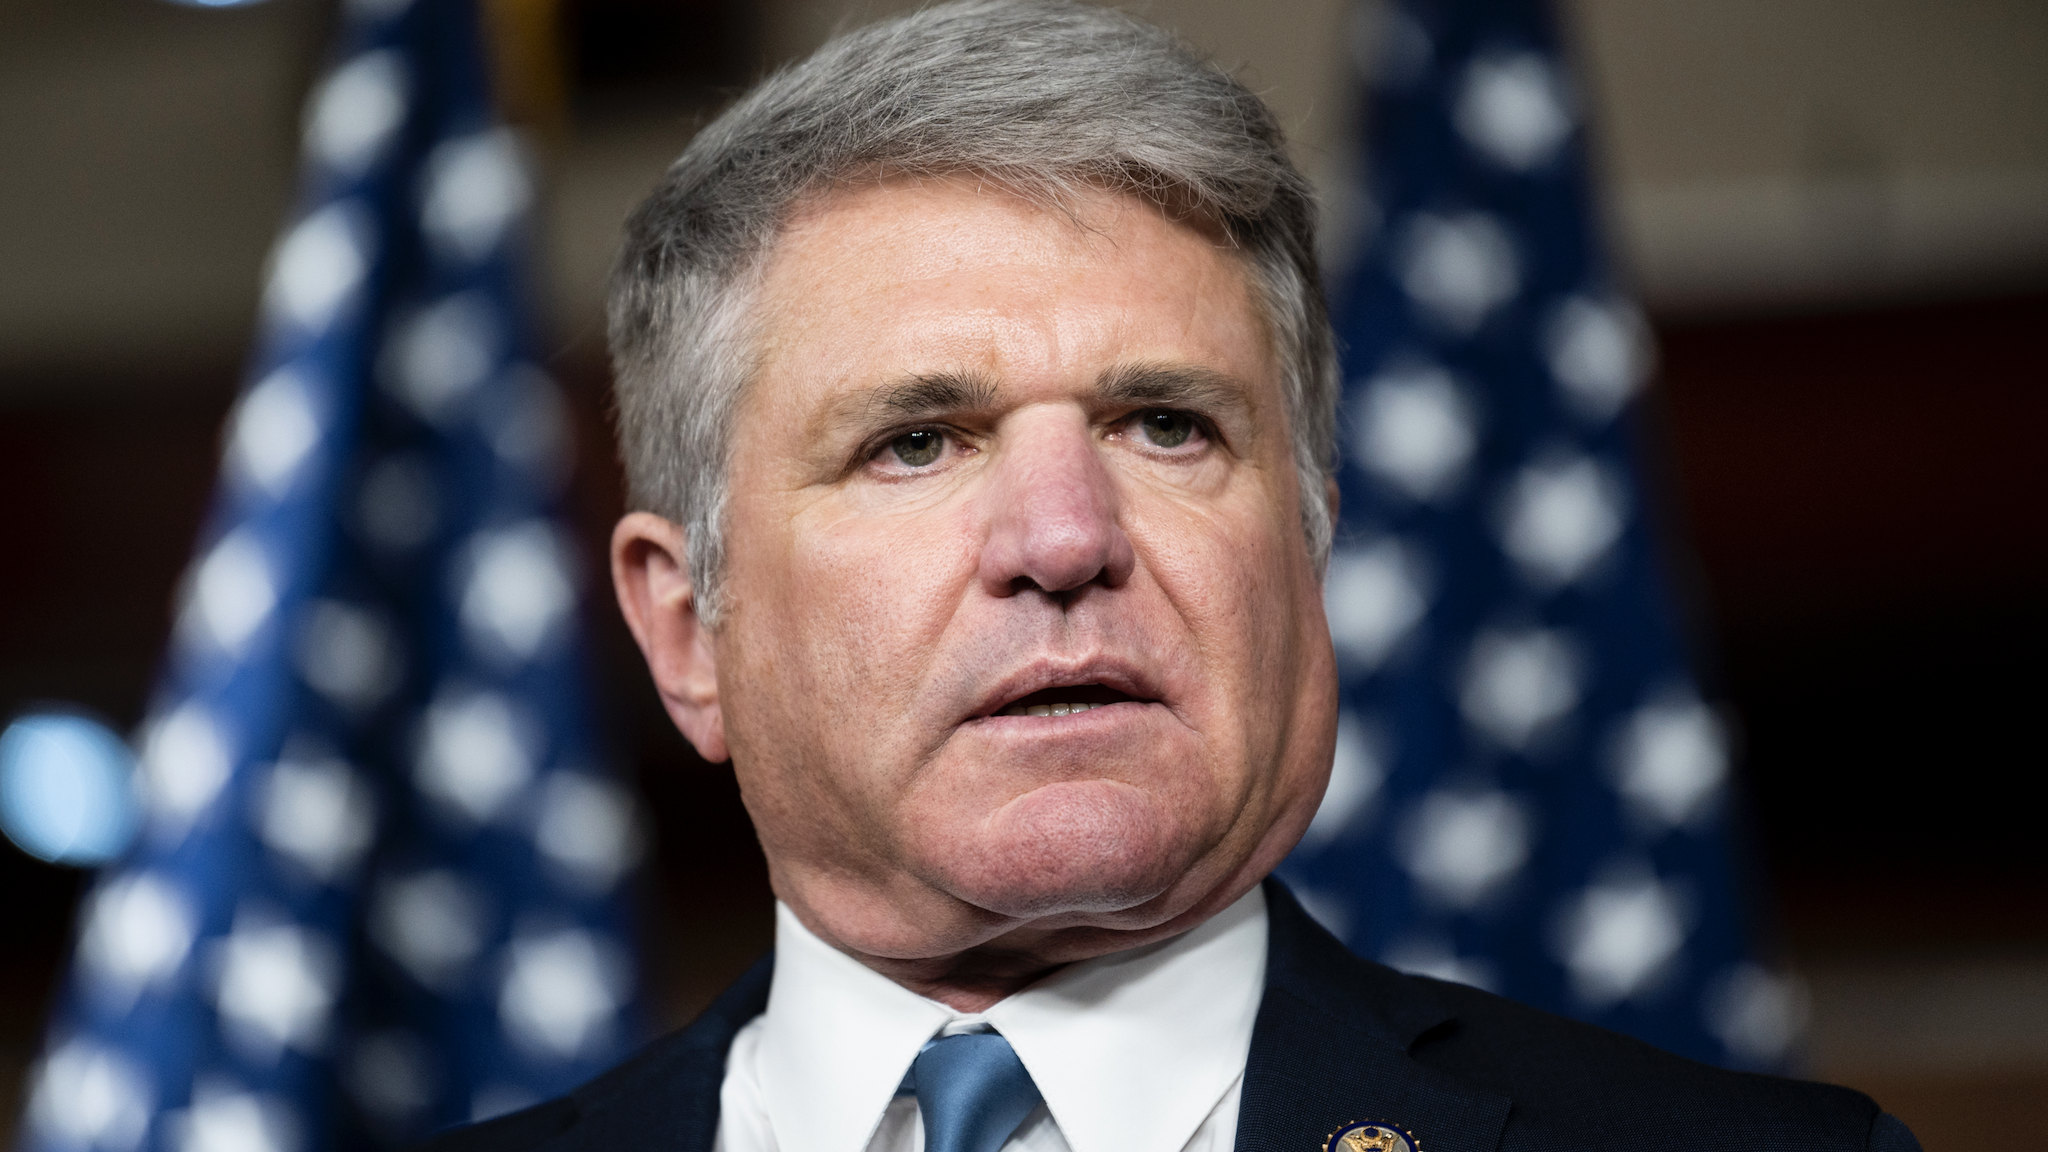 UNITED STATES - FEBRUARY 2: Rep. Michael McCaul, R-Texas, participates in the House Republicans news conference following the House Republican Conference meeting in the Capitol on Wednesday, February 2, 2022.